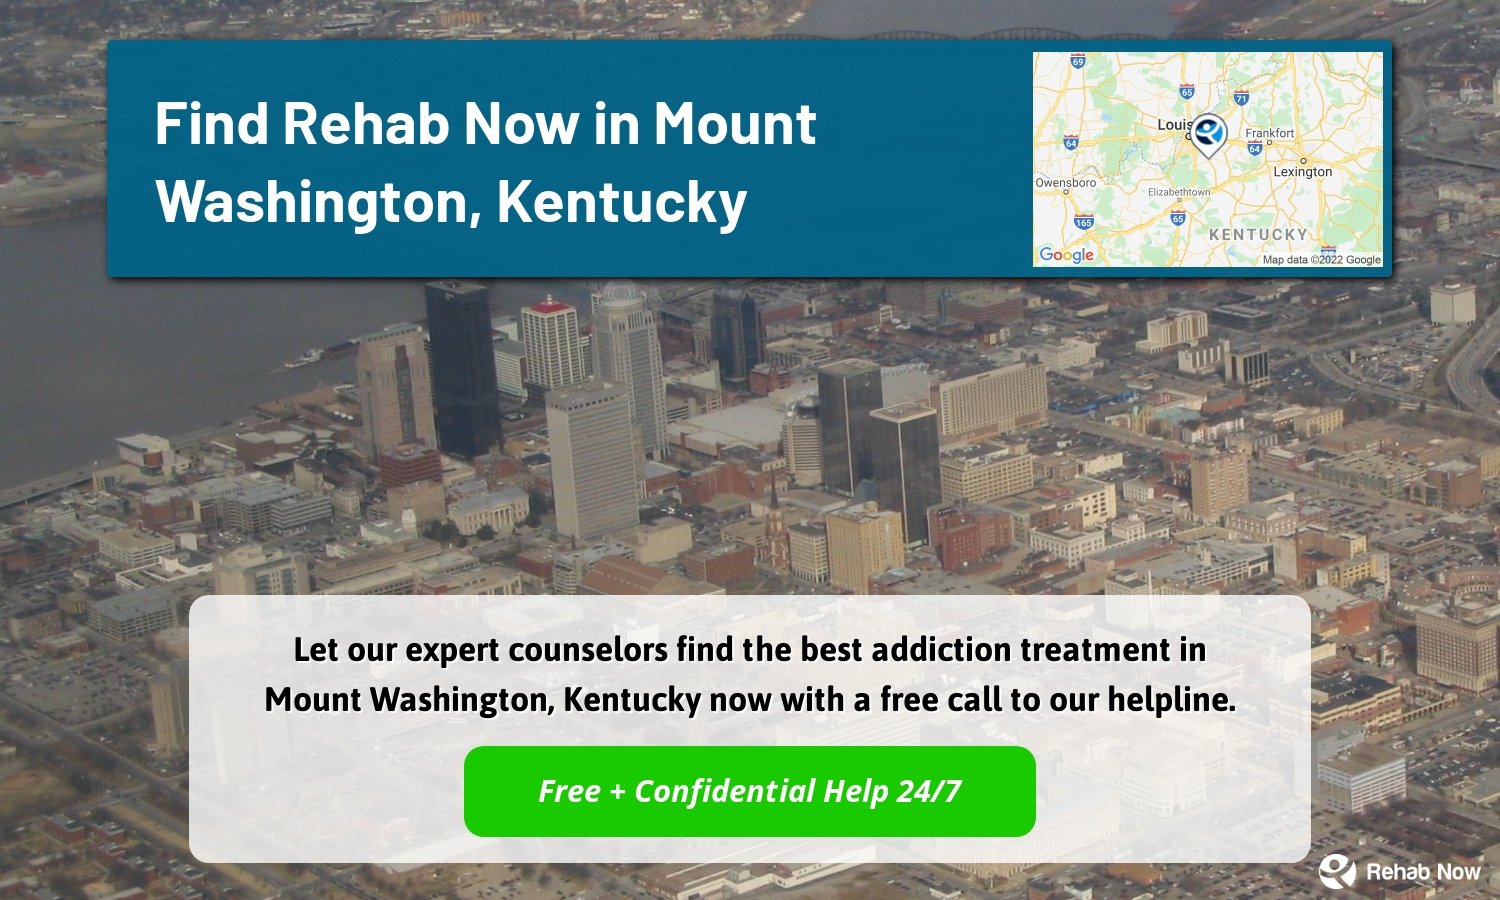 Let our expert counselors find the best addiction treatment in Mount Washington, Kentucky now with a free call to our helpline.